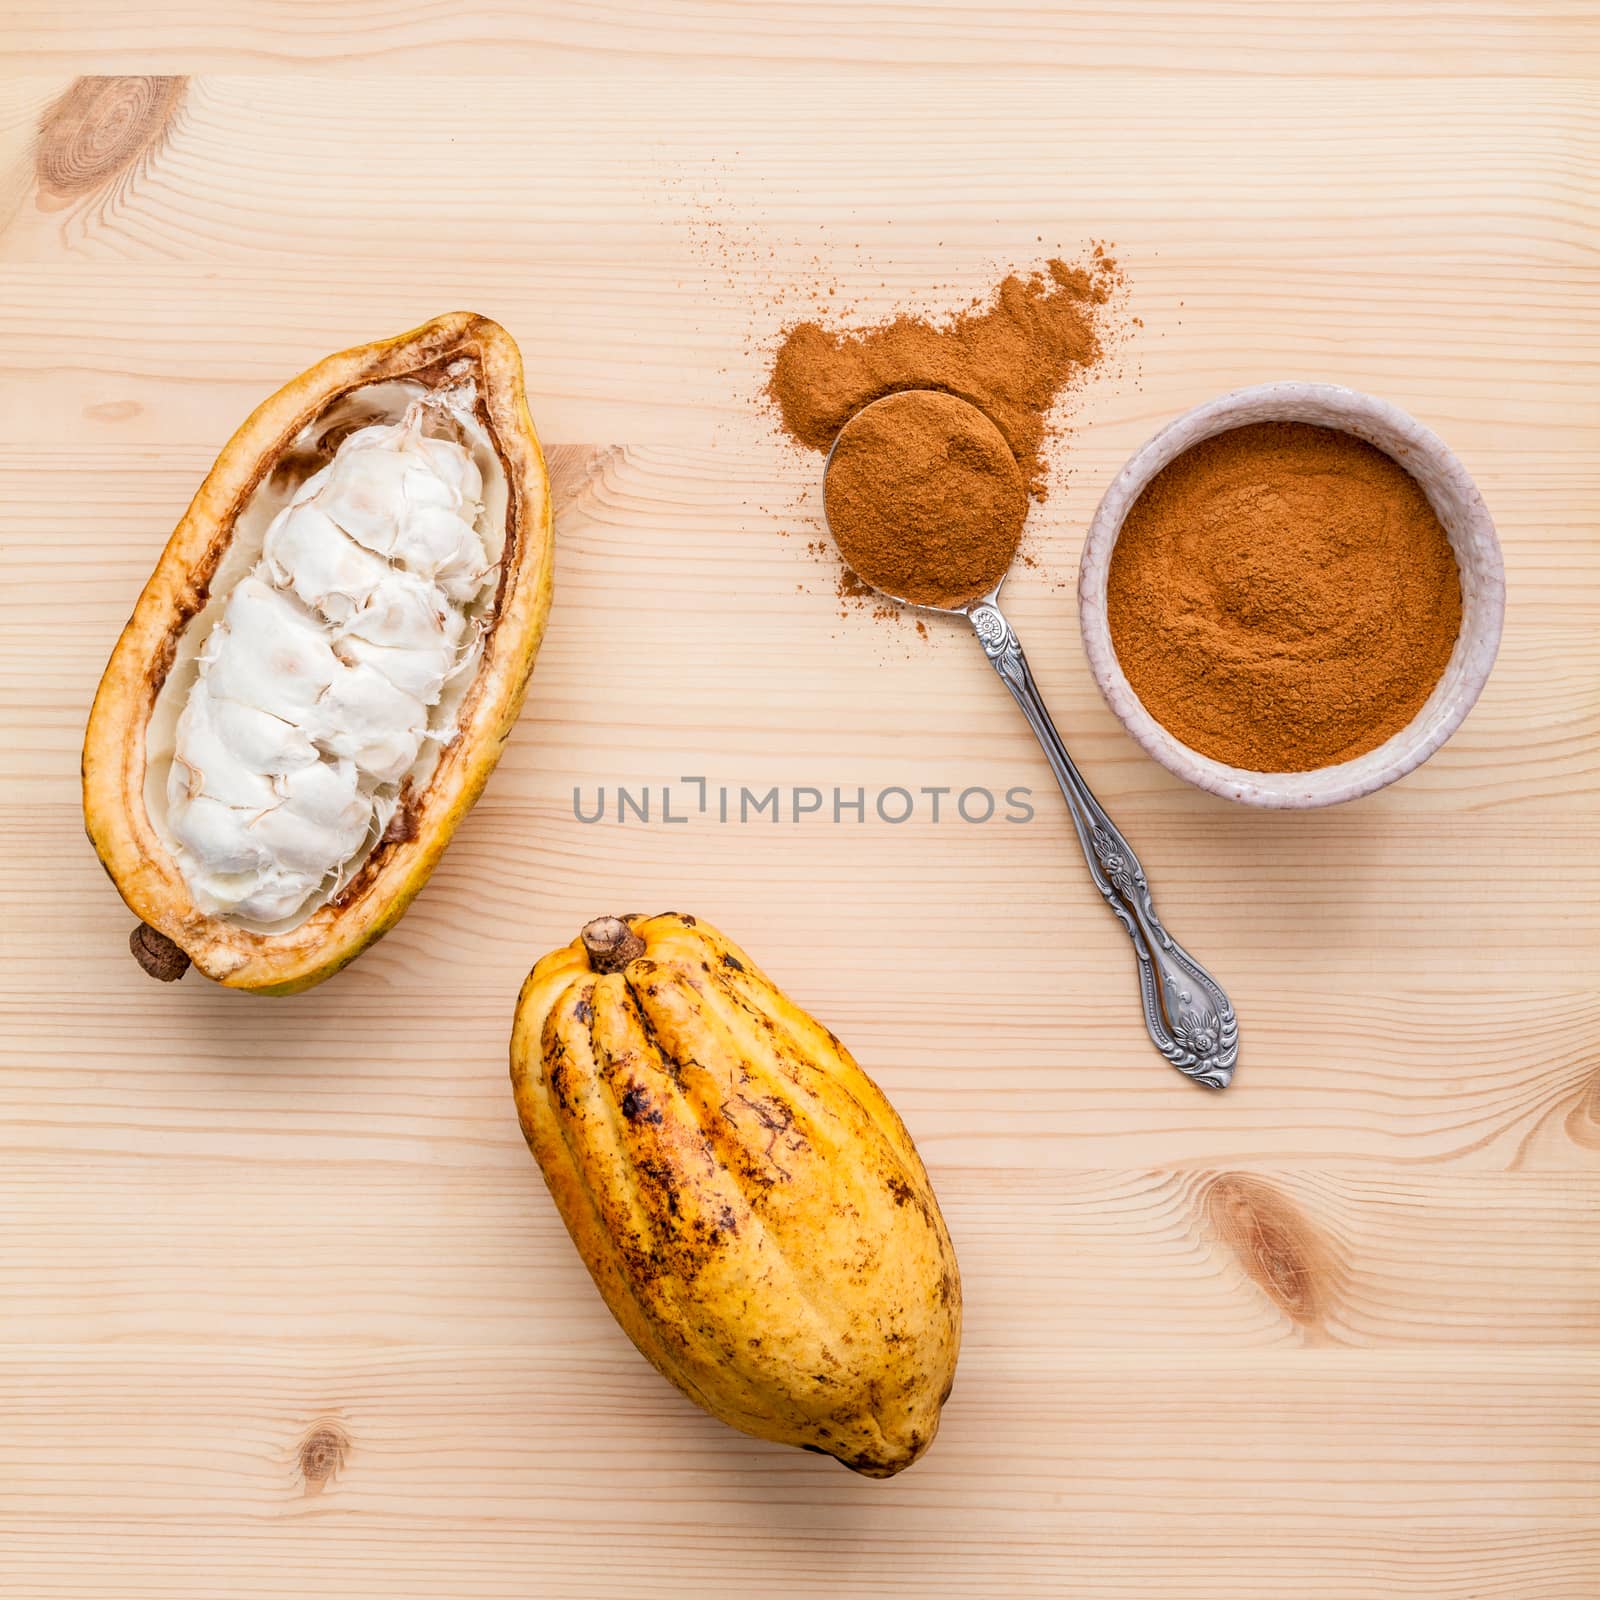 Ripe Indonesia's cocoa  setup on rustic wooden background. by kerdkanno